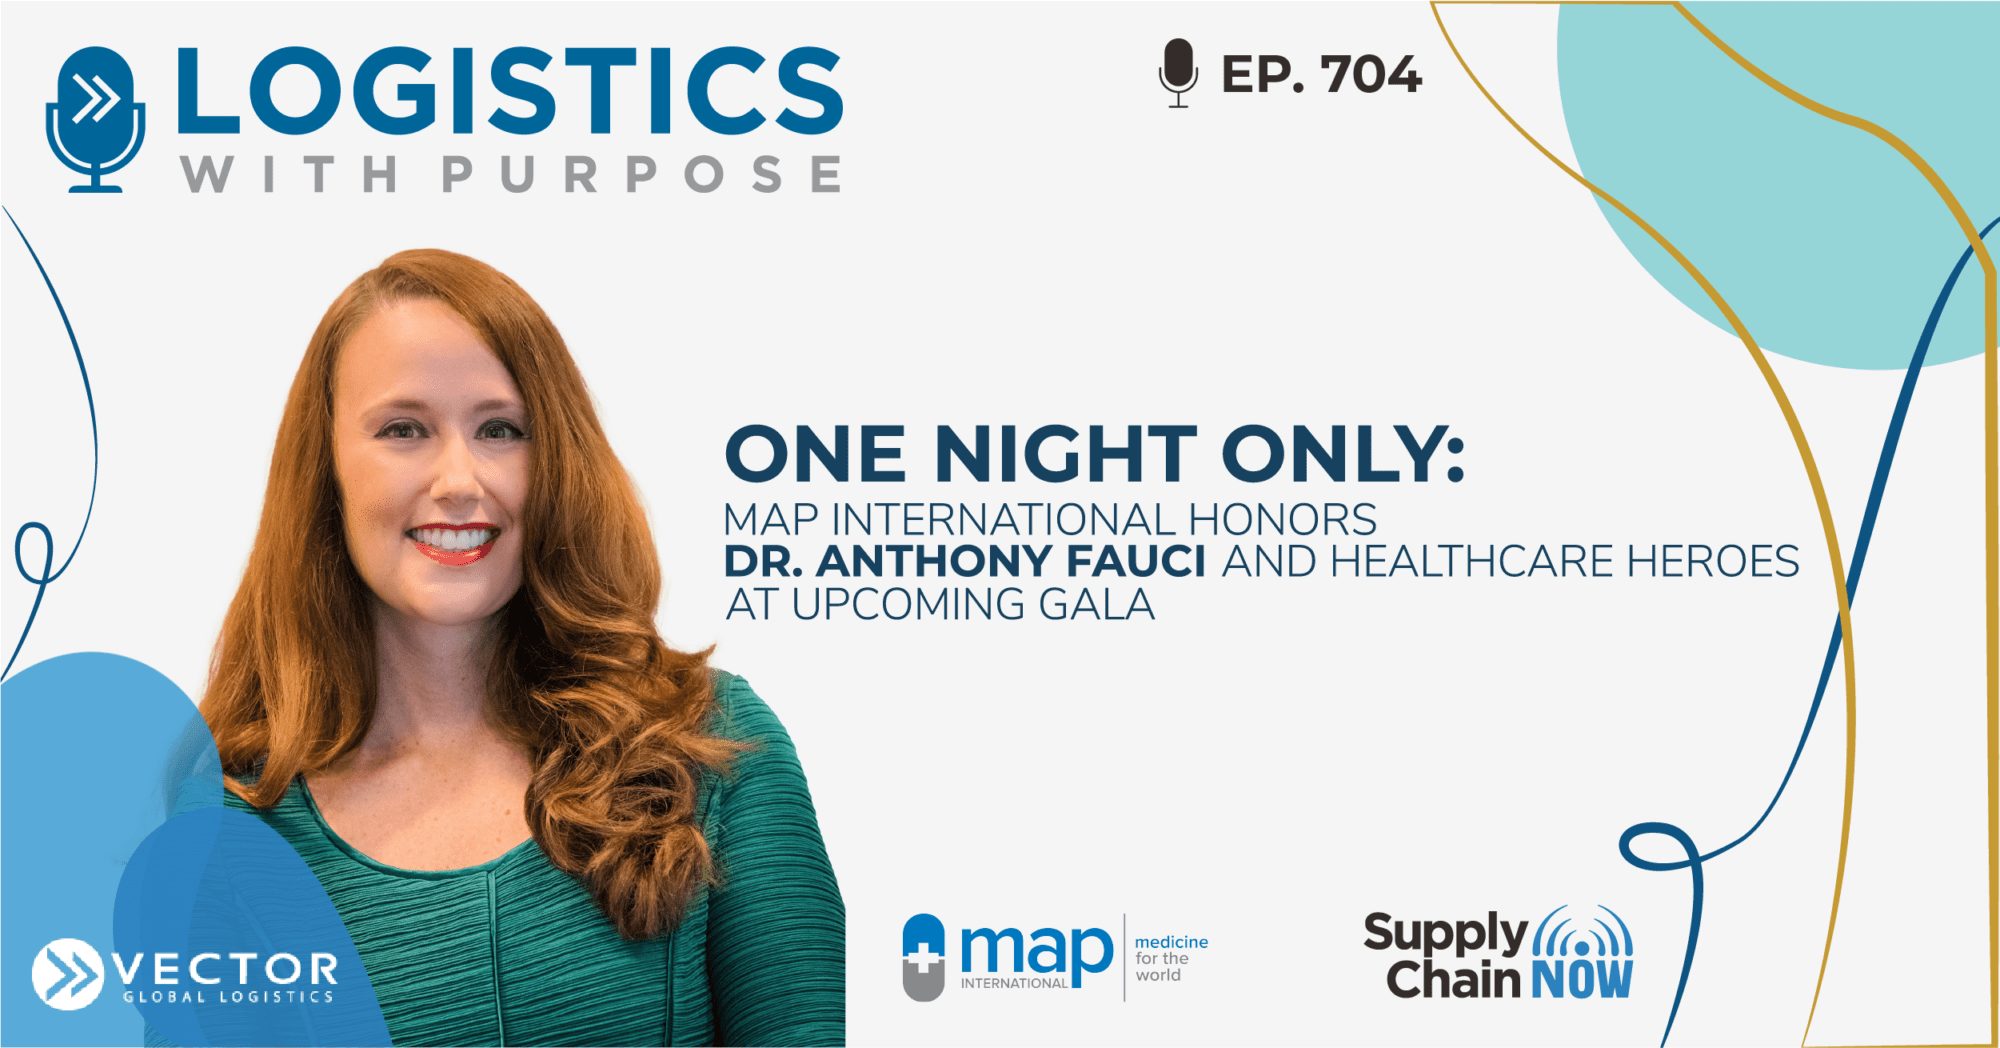 One Night Only: MAP International Honors Dr. Anthony Fauci and Healthcare Heroes